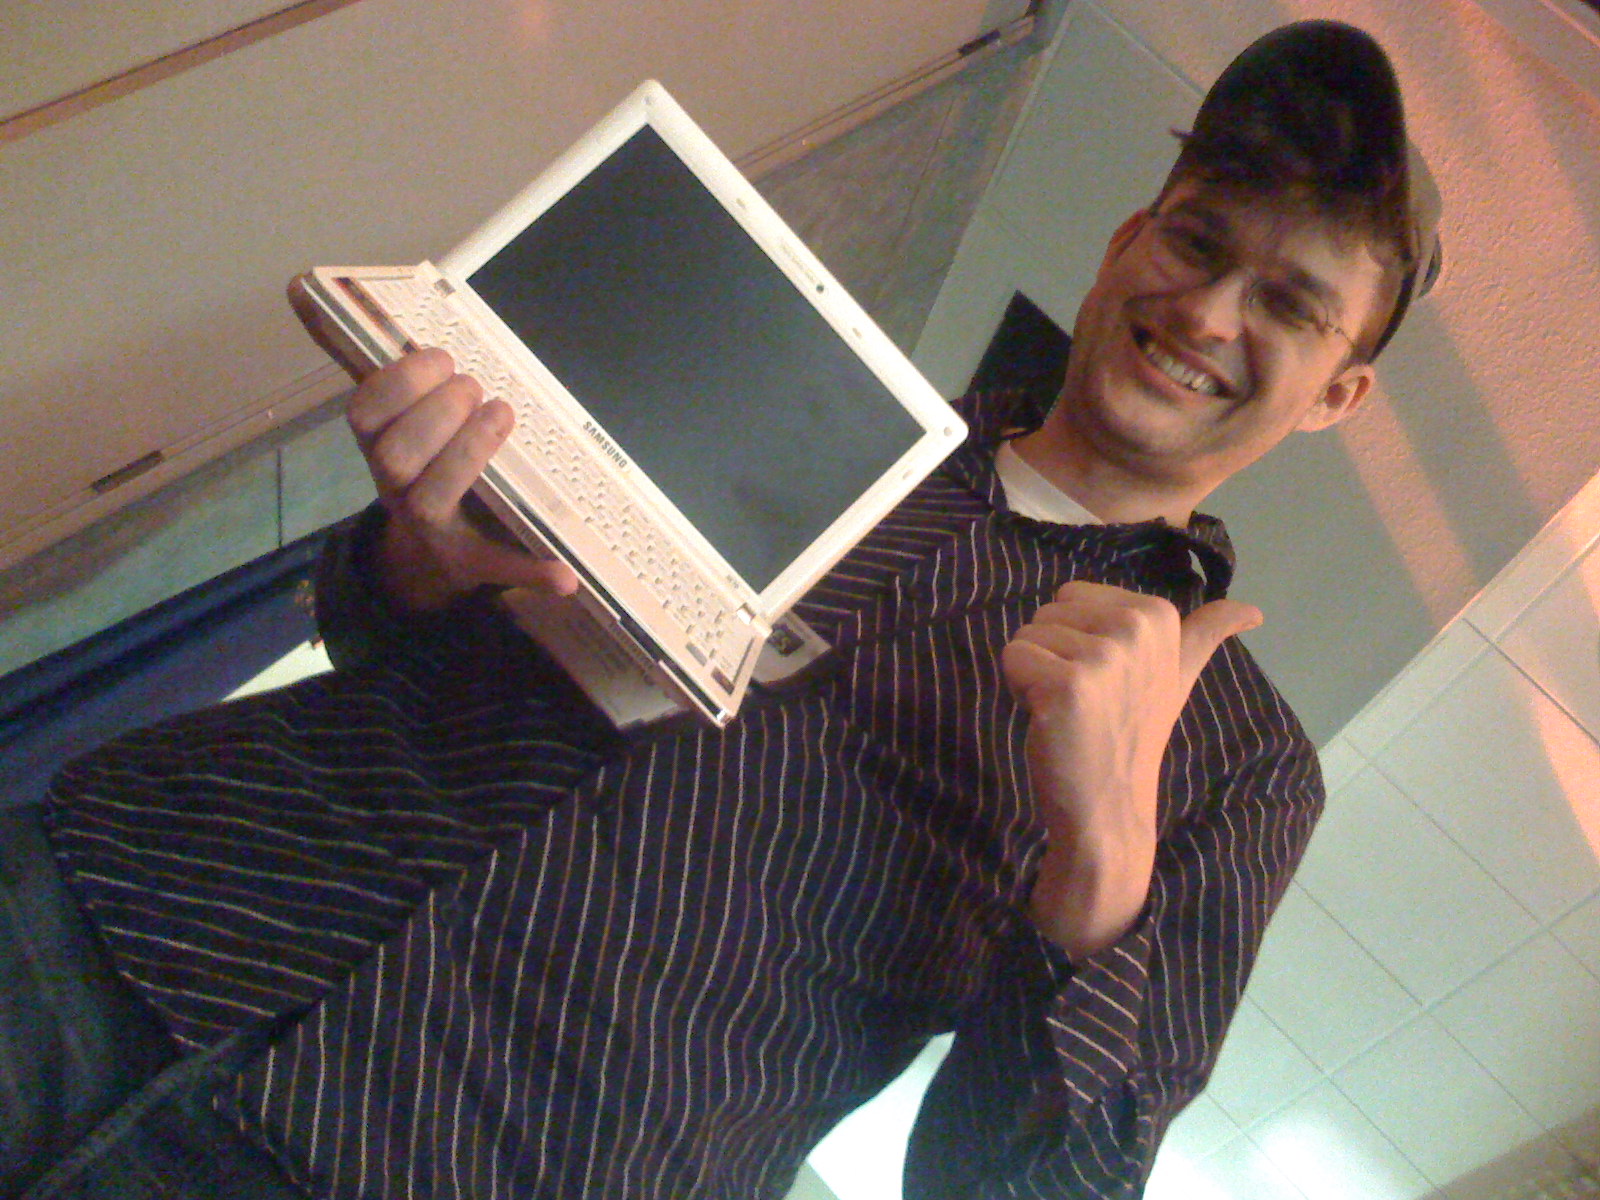 a young man holding onto an old electronic device